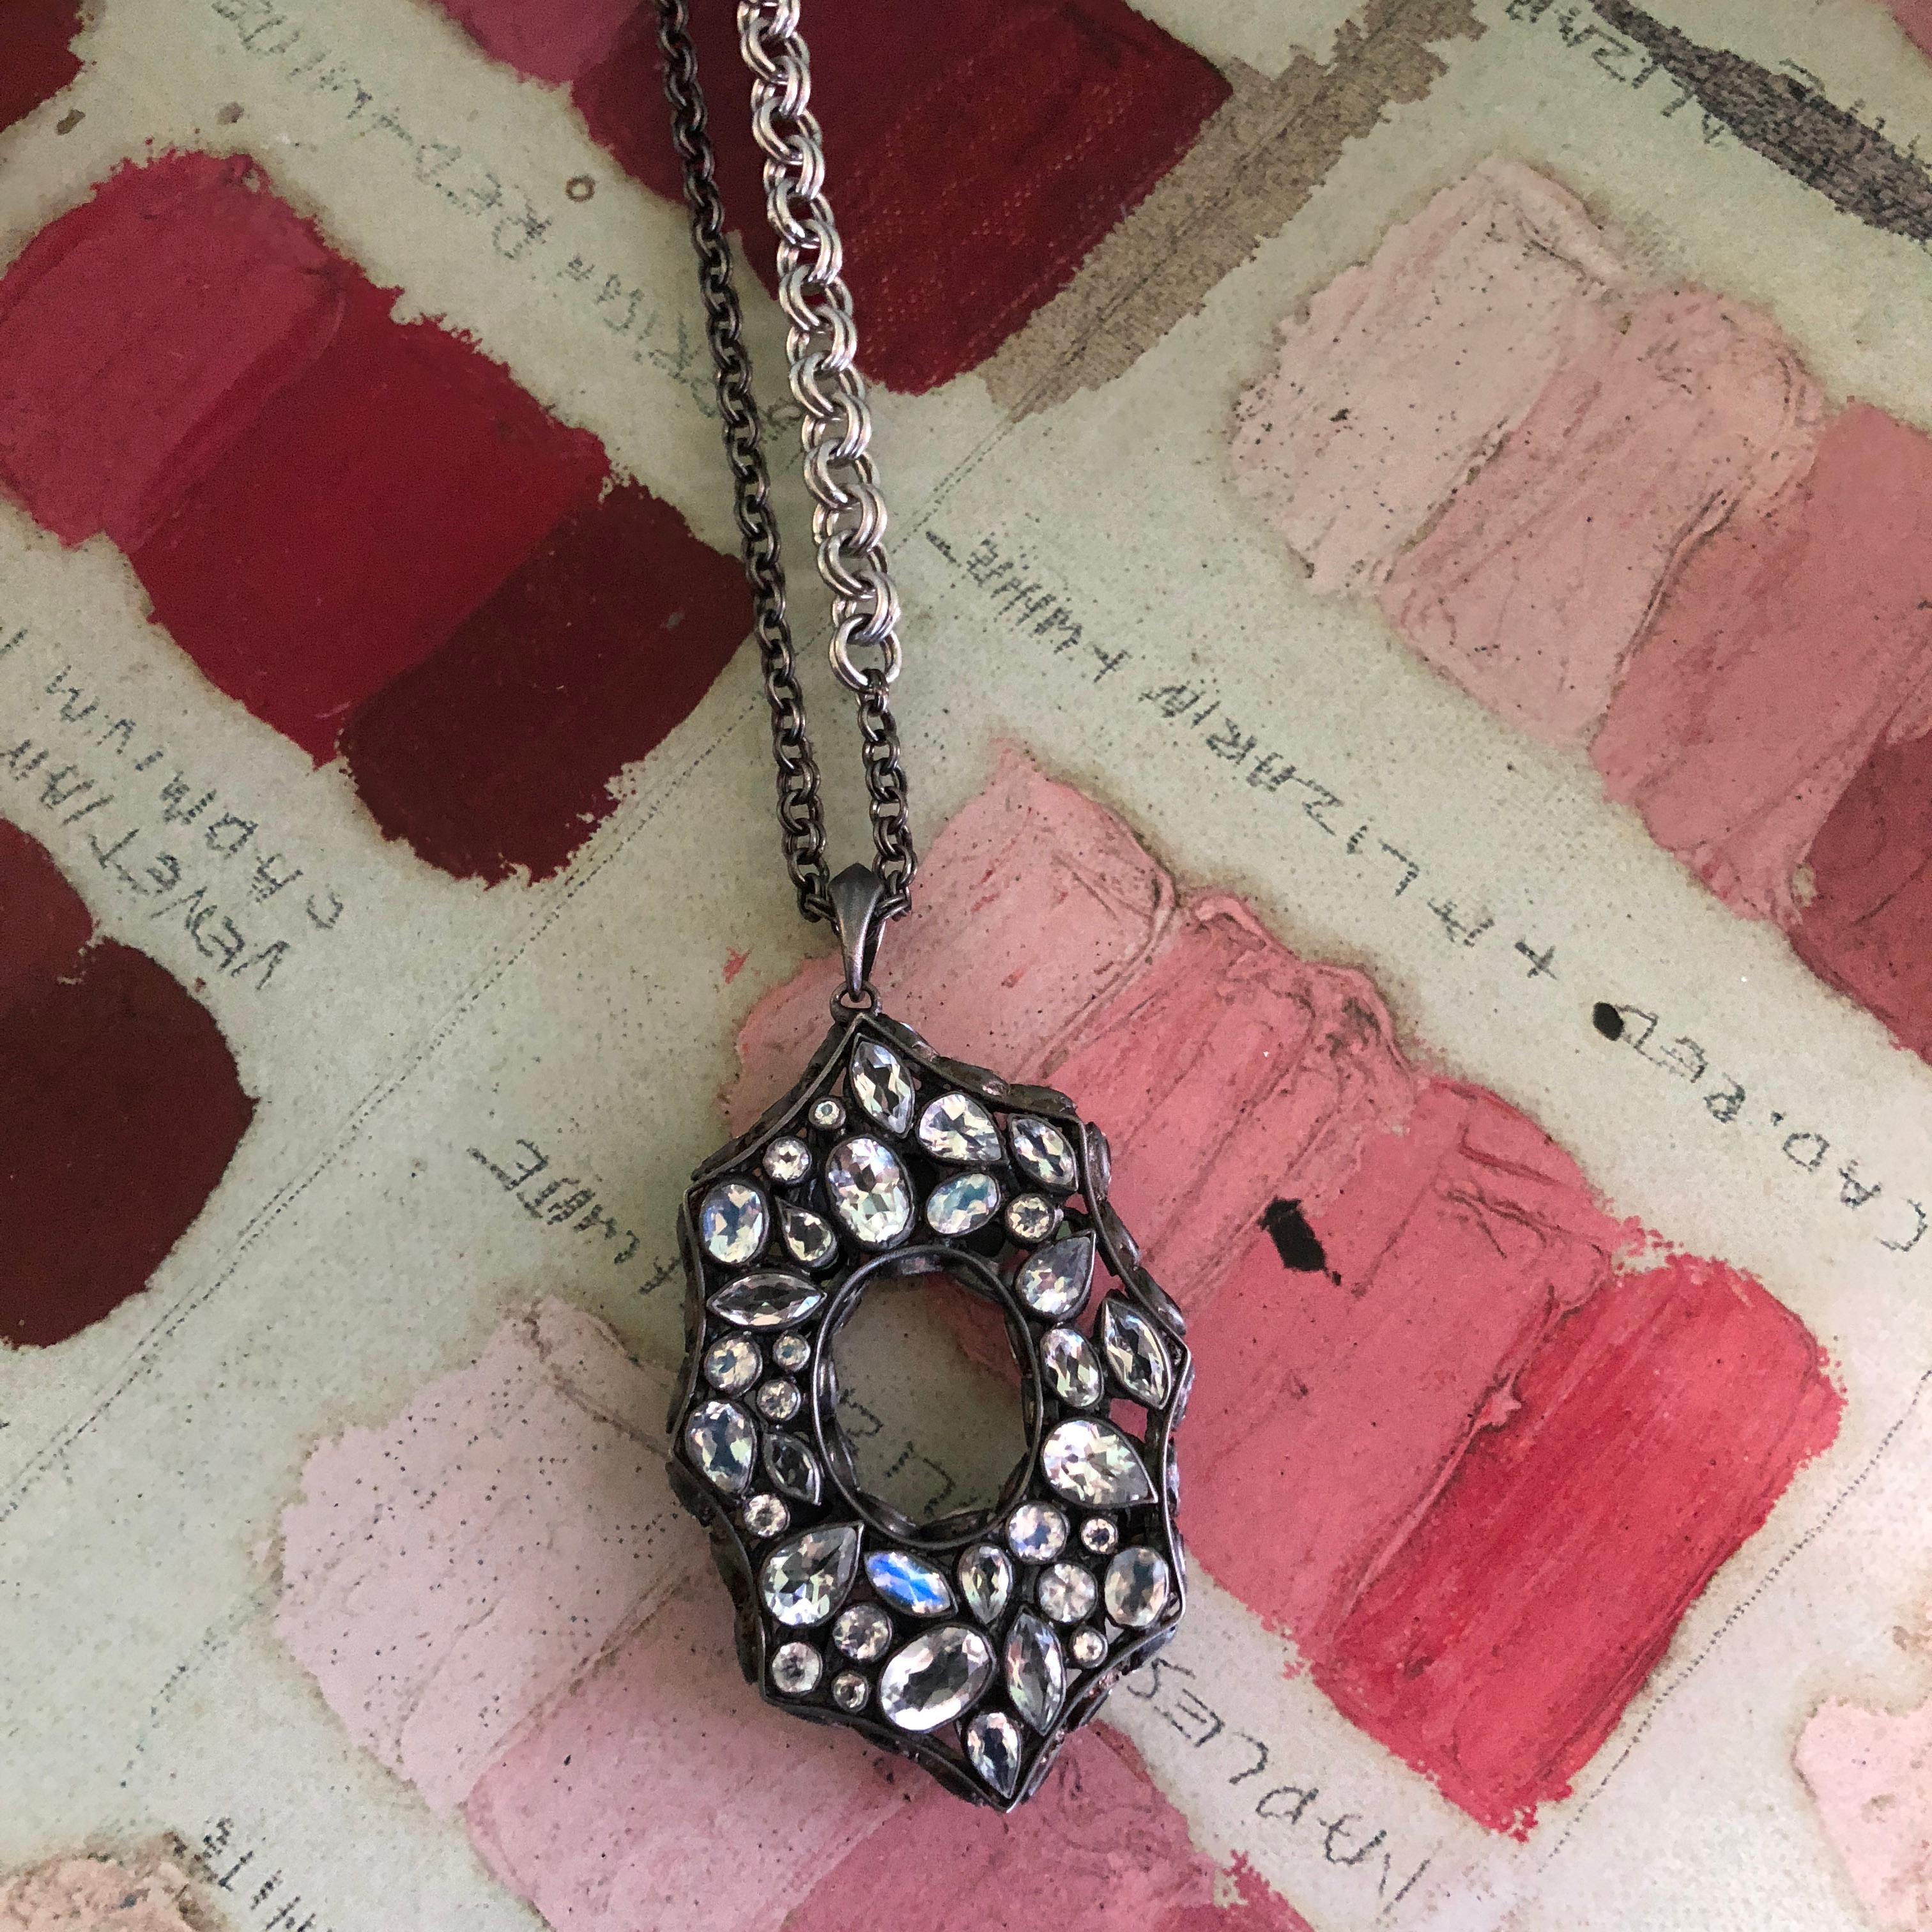 Inspired by the architecture of the 1920's, this reversible pendant has faceted black Spinel on one side, and Rainbow Moonstone on the other side, with side detailing as well.  This pendant is finished in Lauren Harper's signature black rhodium